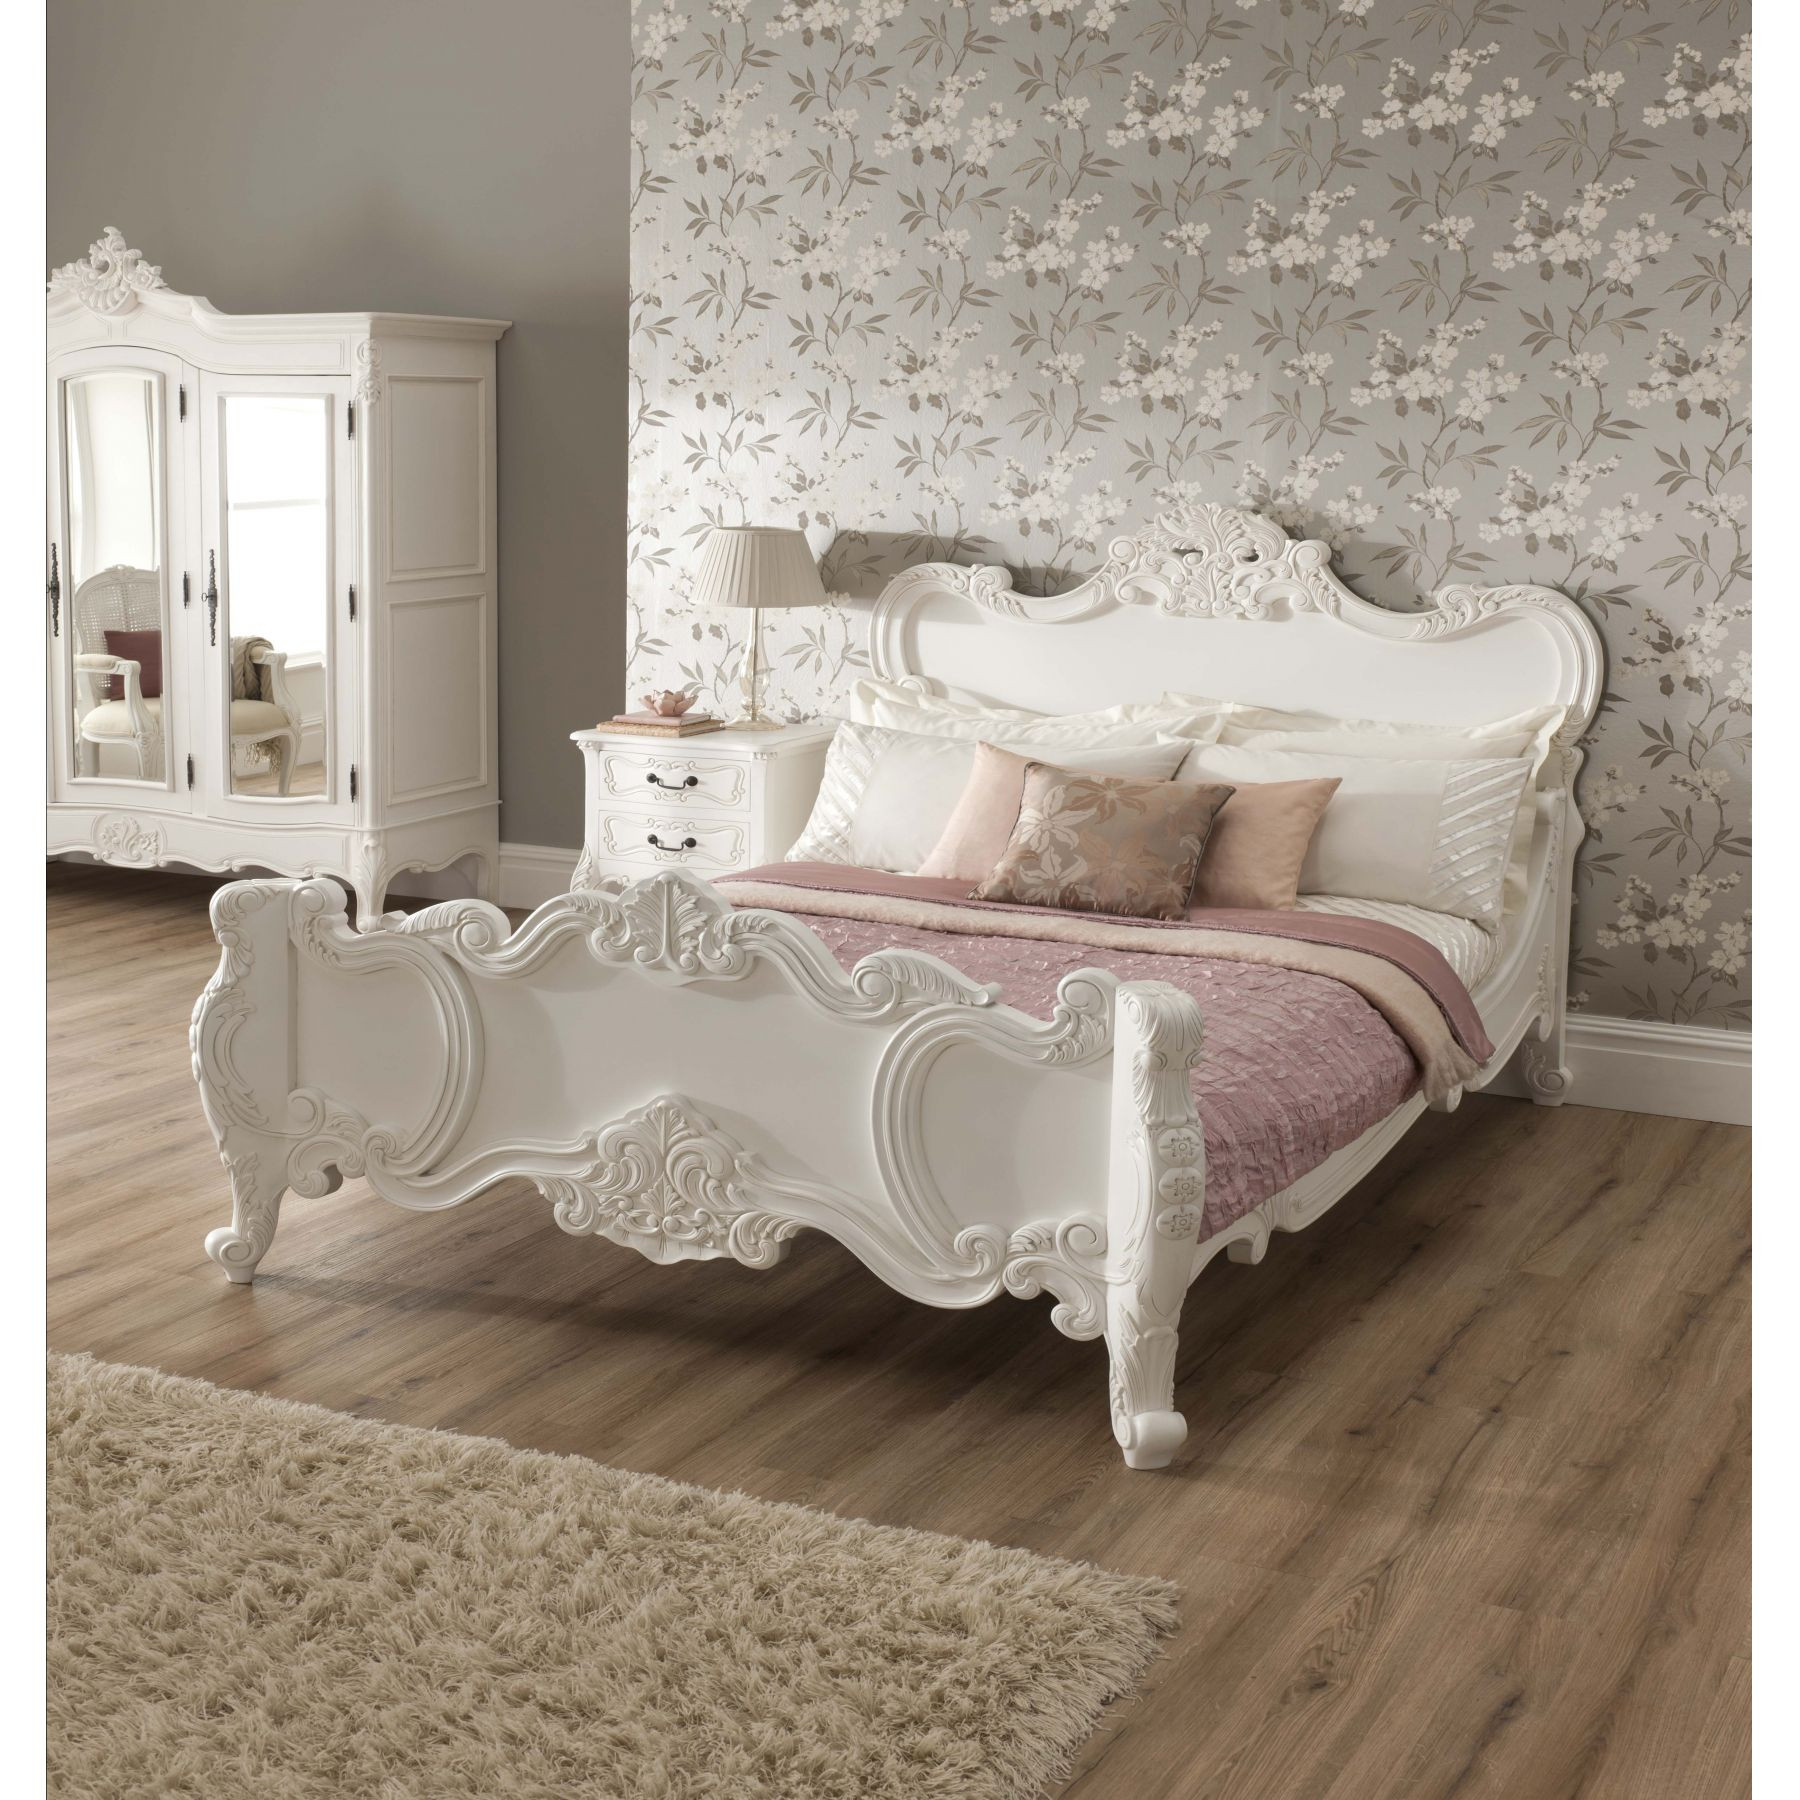 Shabby Chic Bedroom Sets
 Vintage Your Room with 9 Shabby Chic Bedroom Furniture